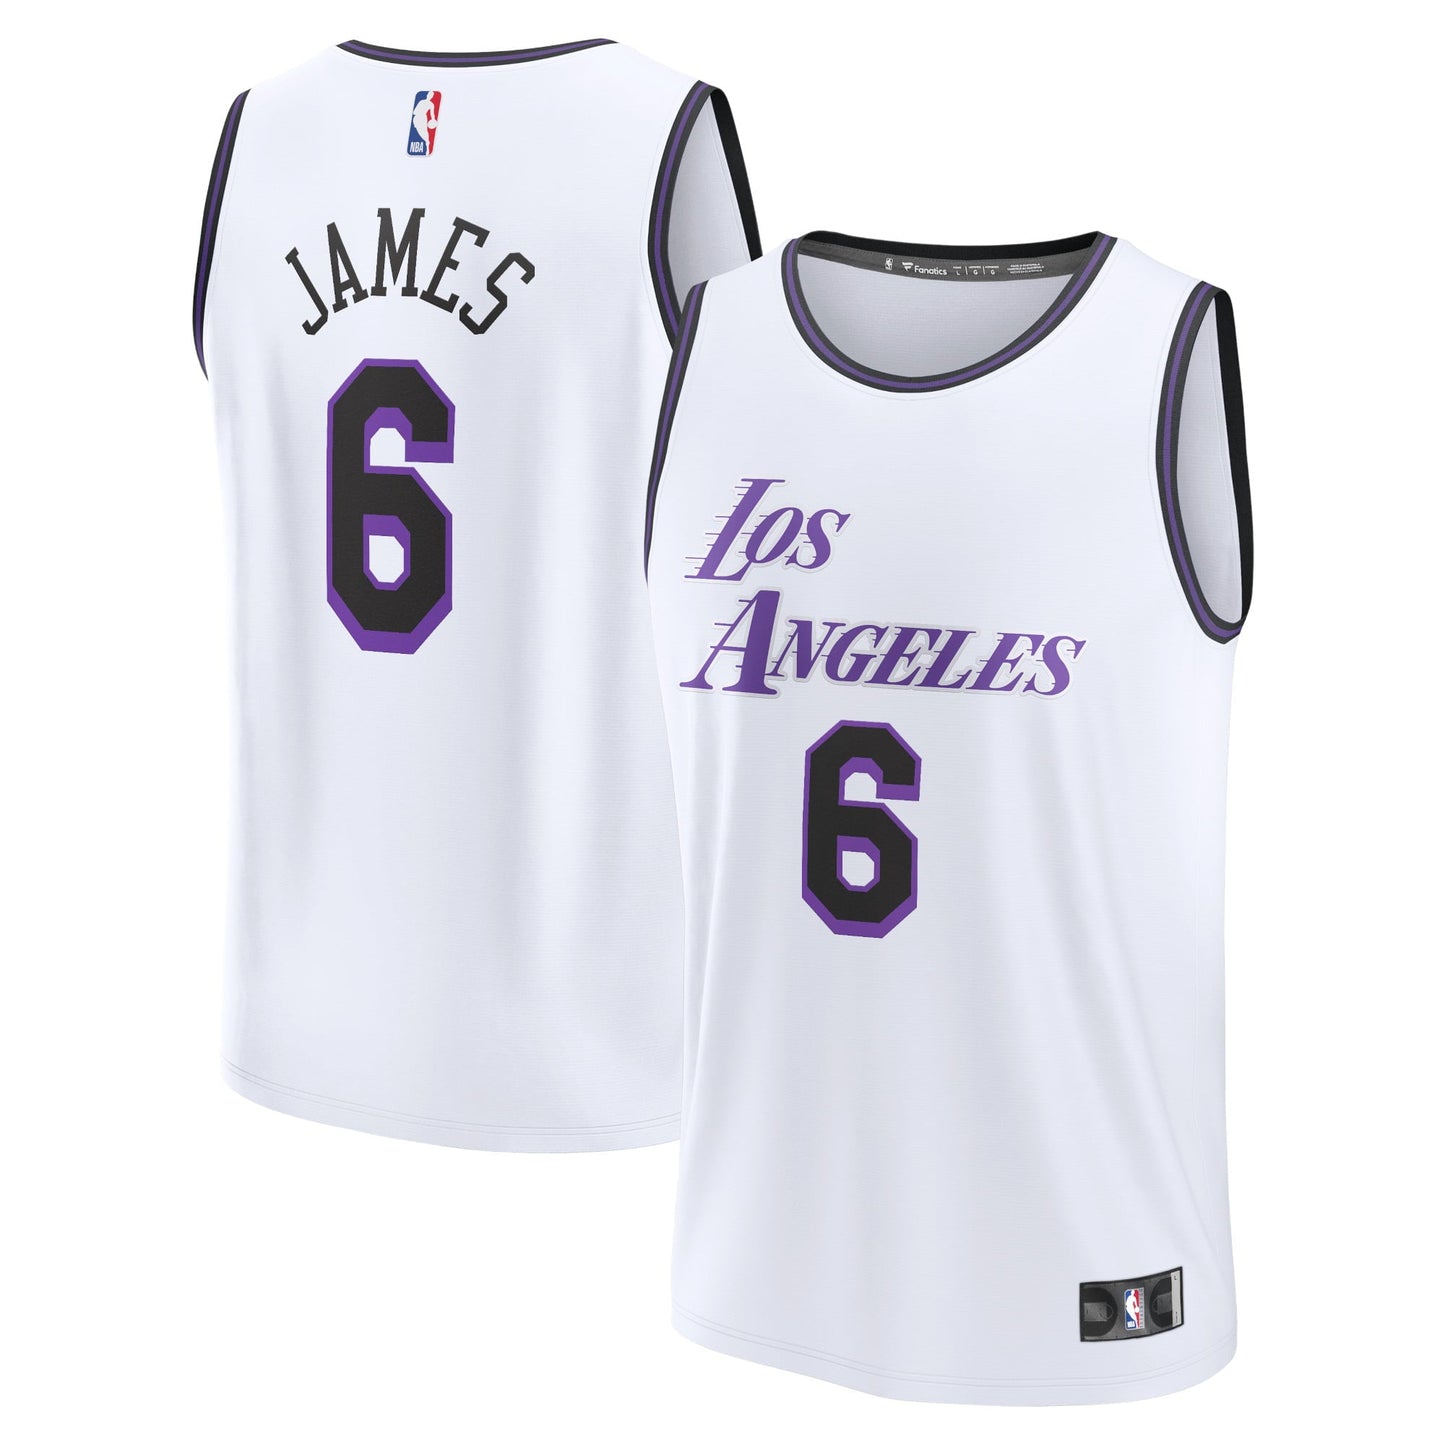 Youth Fanatics Branded LeBron James White Los Angeles Lakers 2022/23 Fastbreak Jersey - City Edition